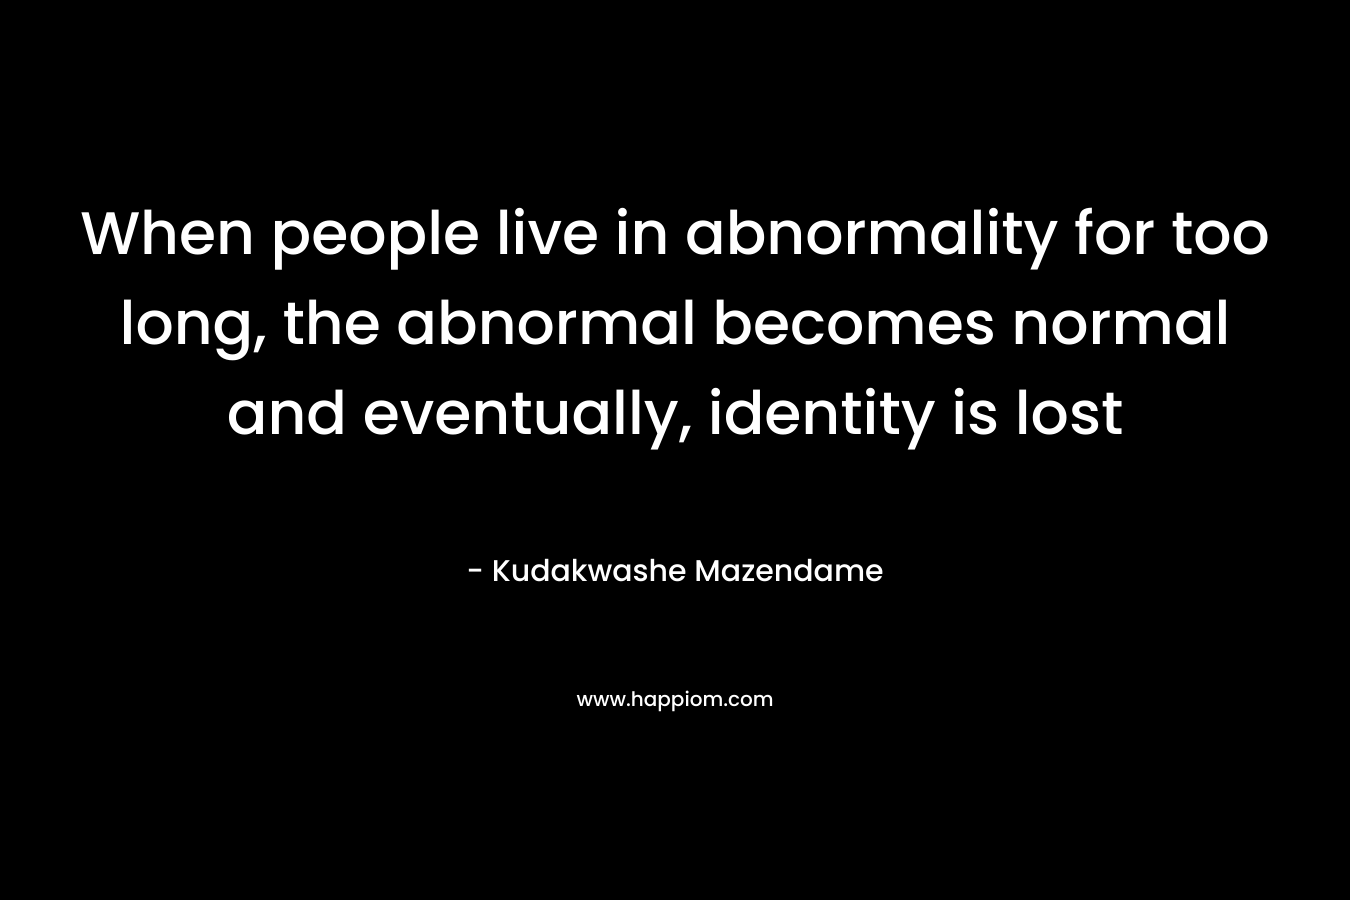 When people live in abnormality for too long, the abnormal becomes normal and eventually, identity is lost – Kudakwashe Mazendame